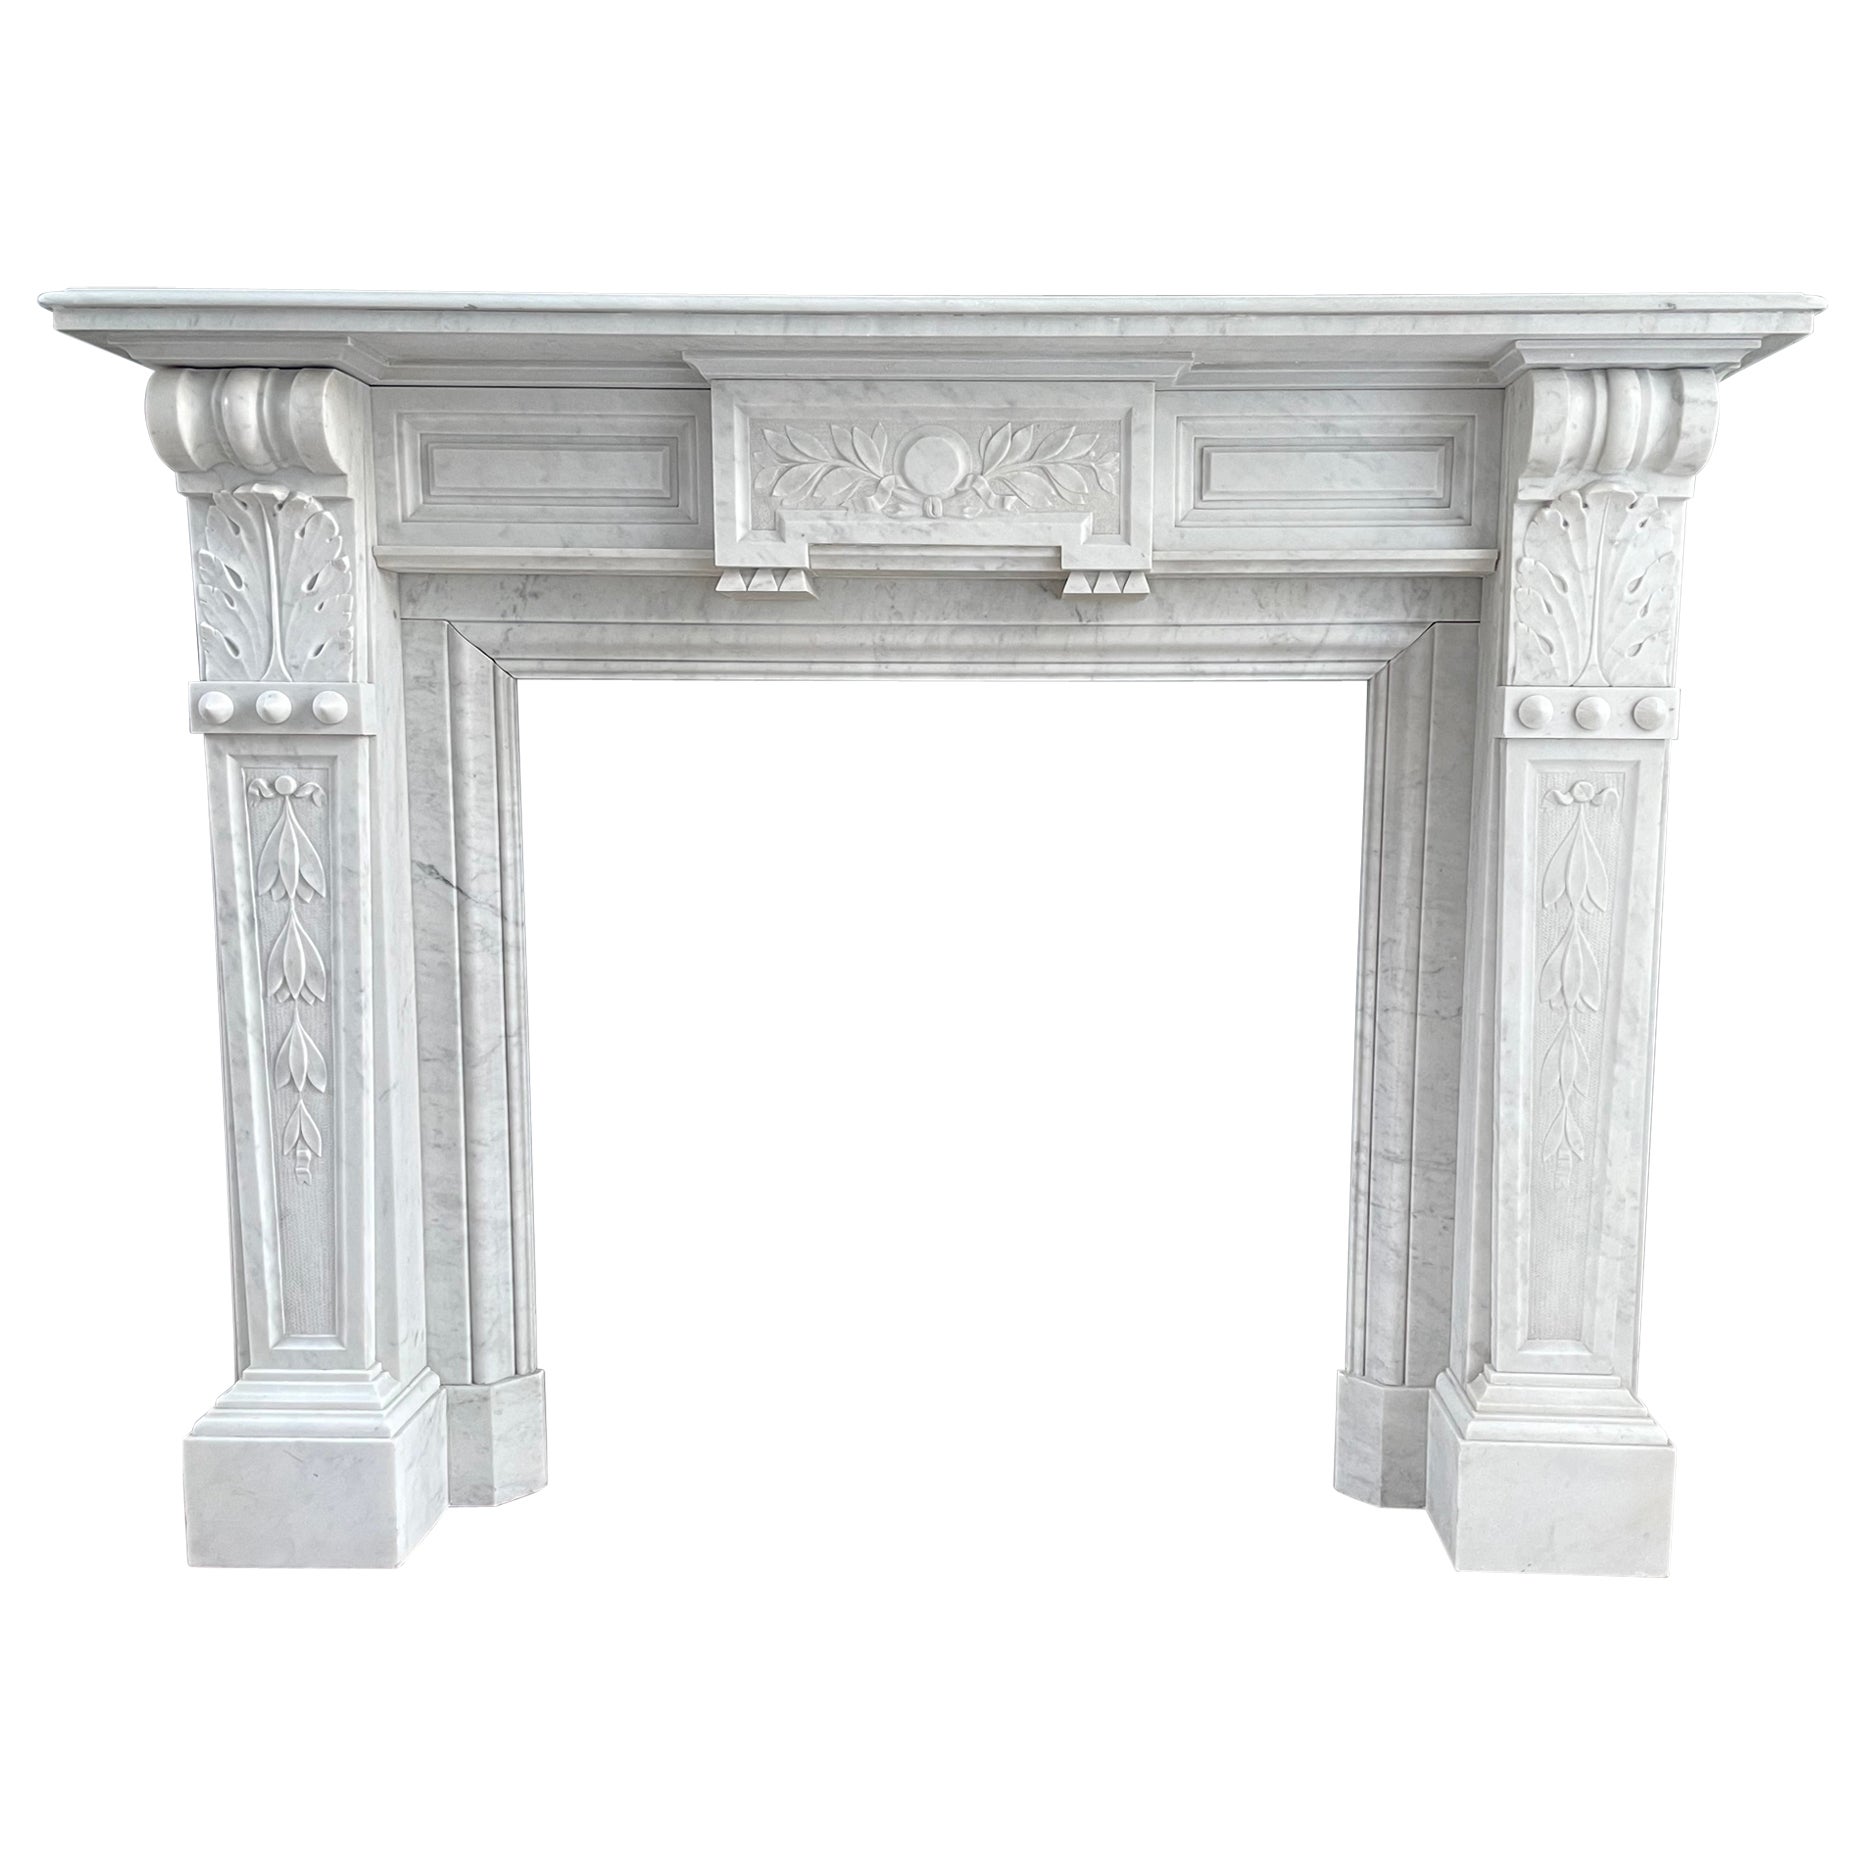 Antique Carrara White Marble Circular Fireplace For Sale